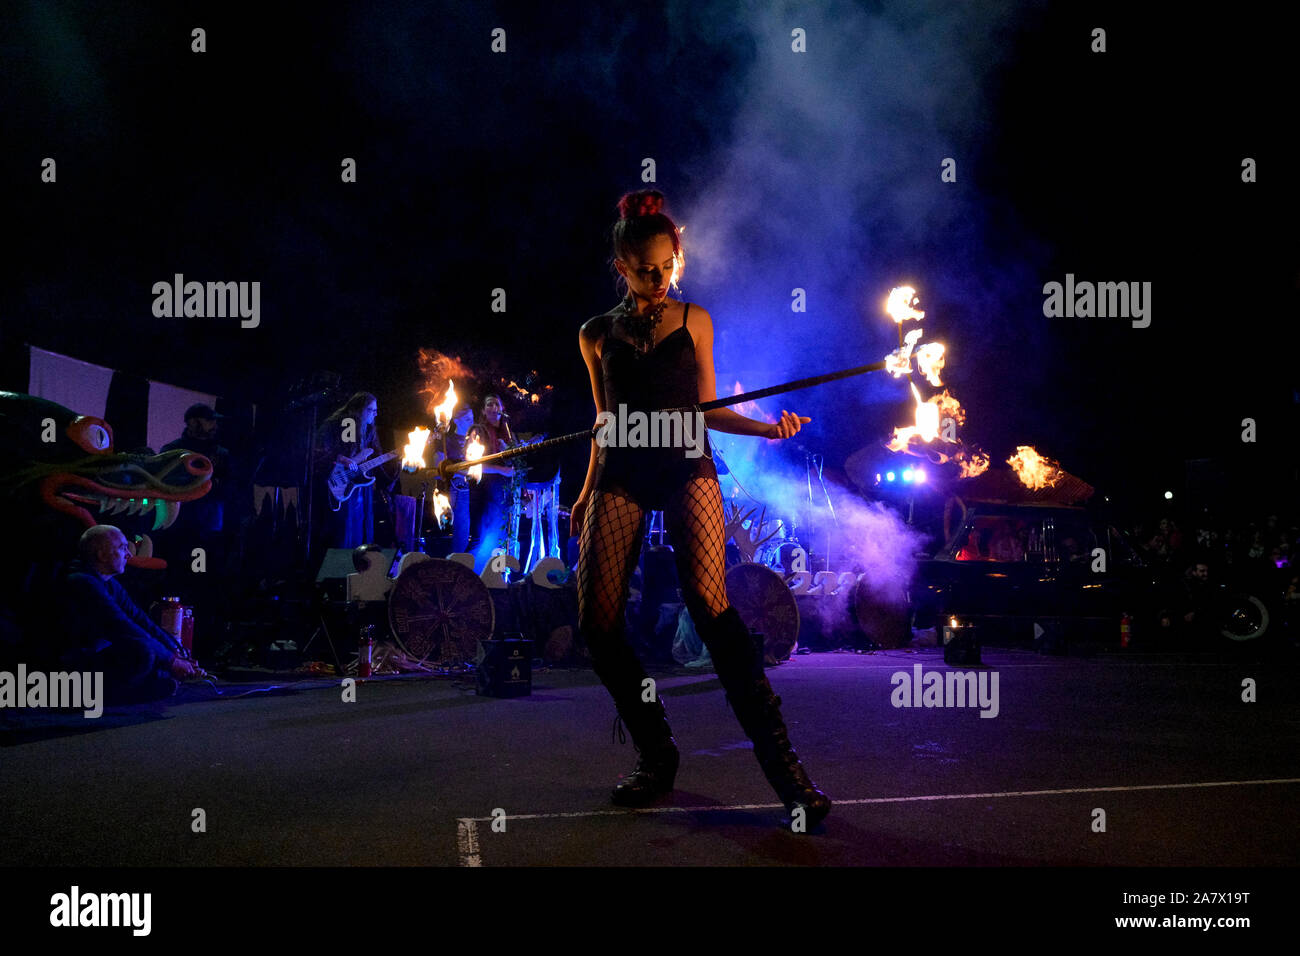 Parade of Lost Souls, Fire show, Vancouver, British Columbia, Canada Foto Stock